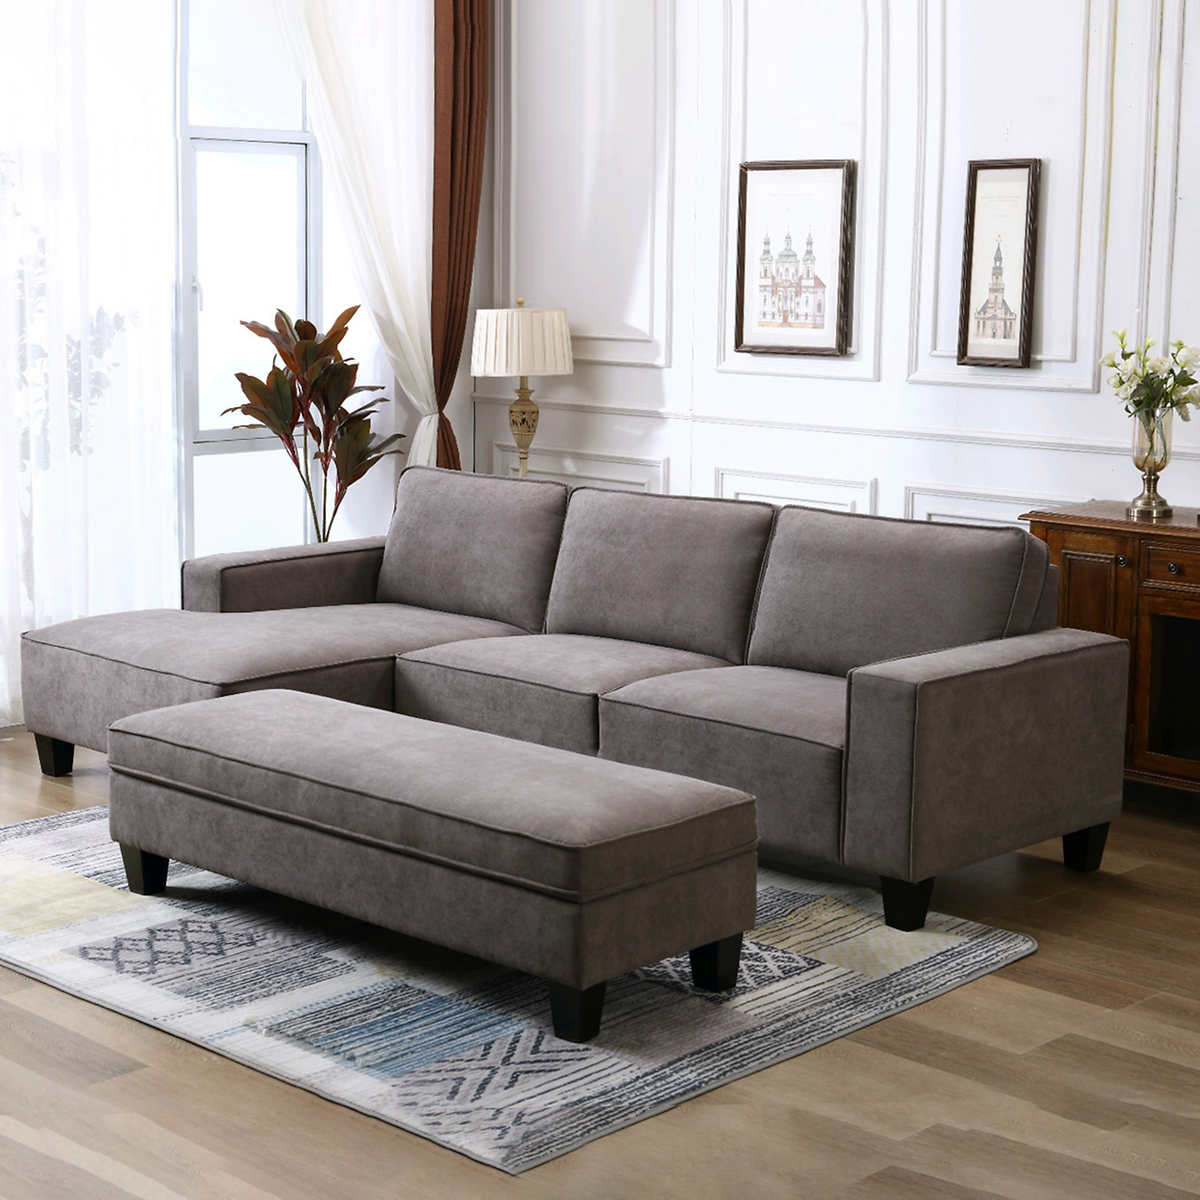 Marbella Fabric Sectional With Storage Ottoman Costco